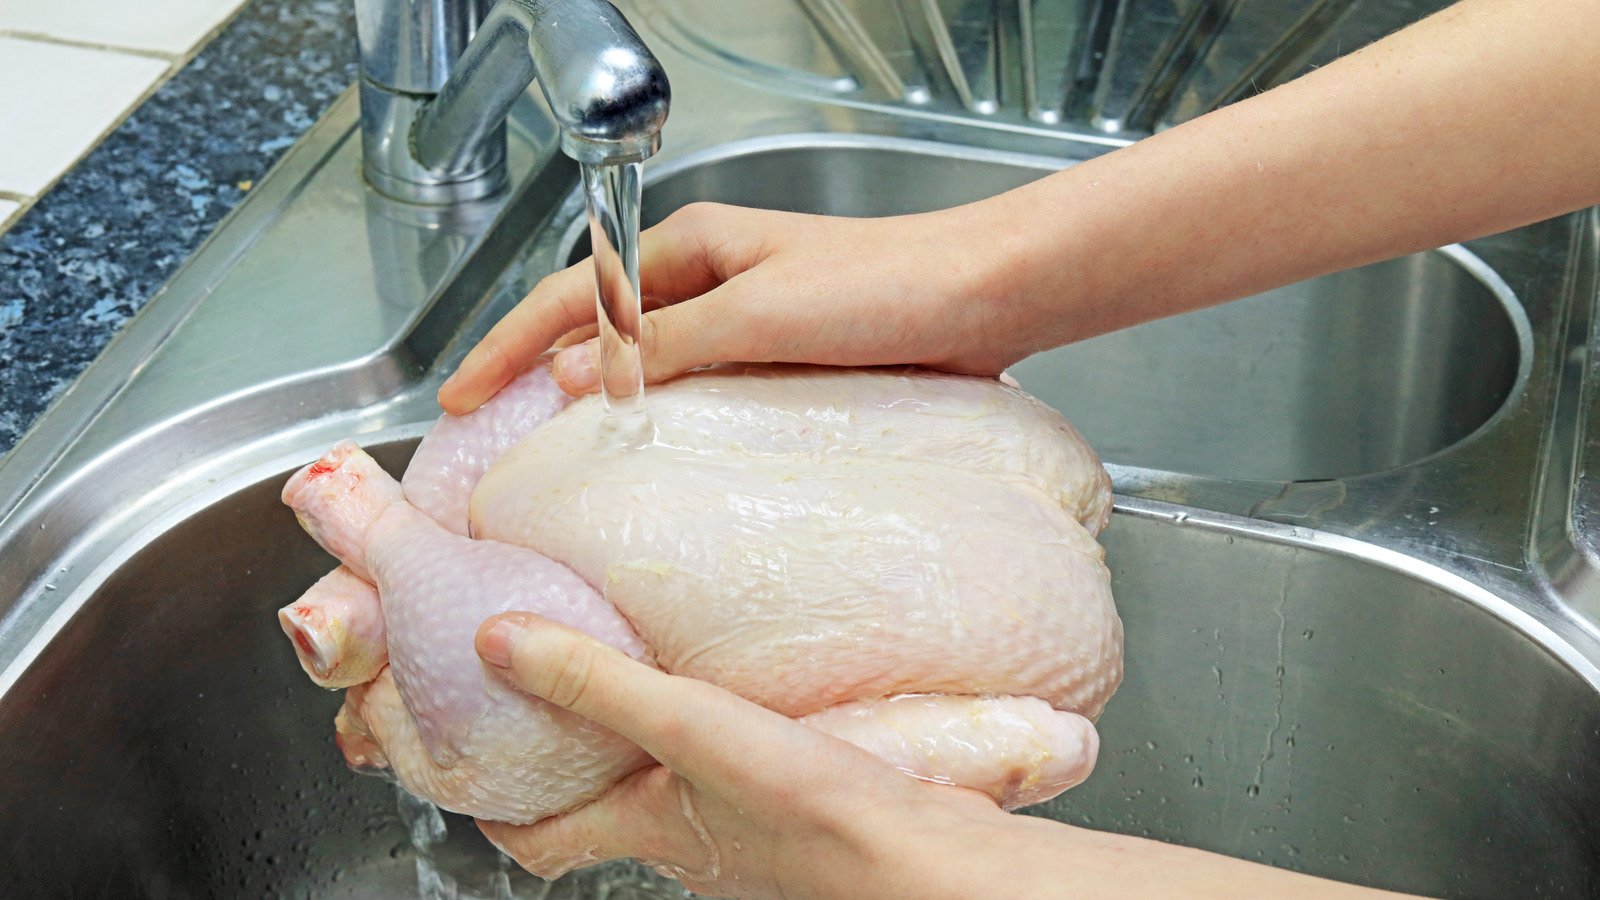 The Real Reason You Should Never Wash Raw Chicken - Health Digest